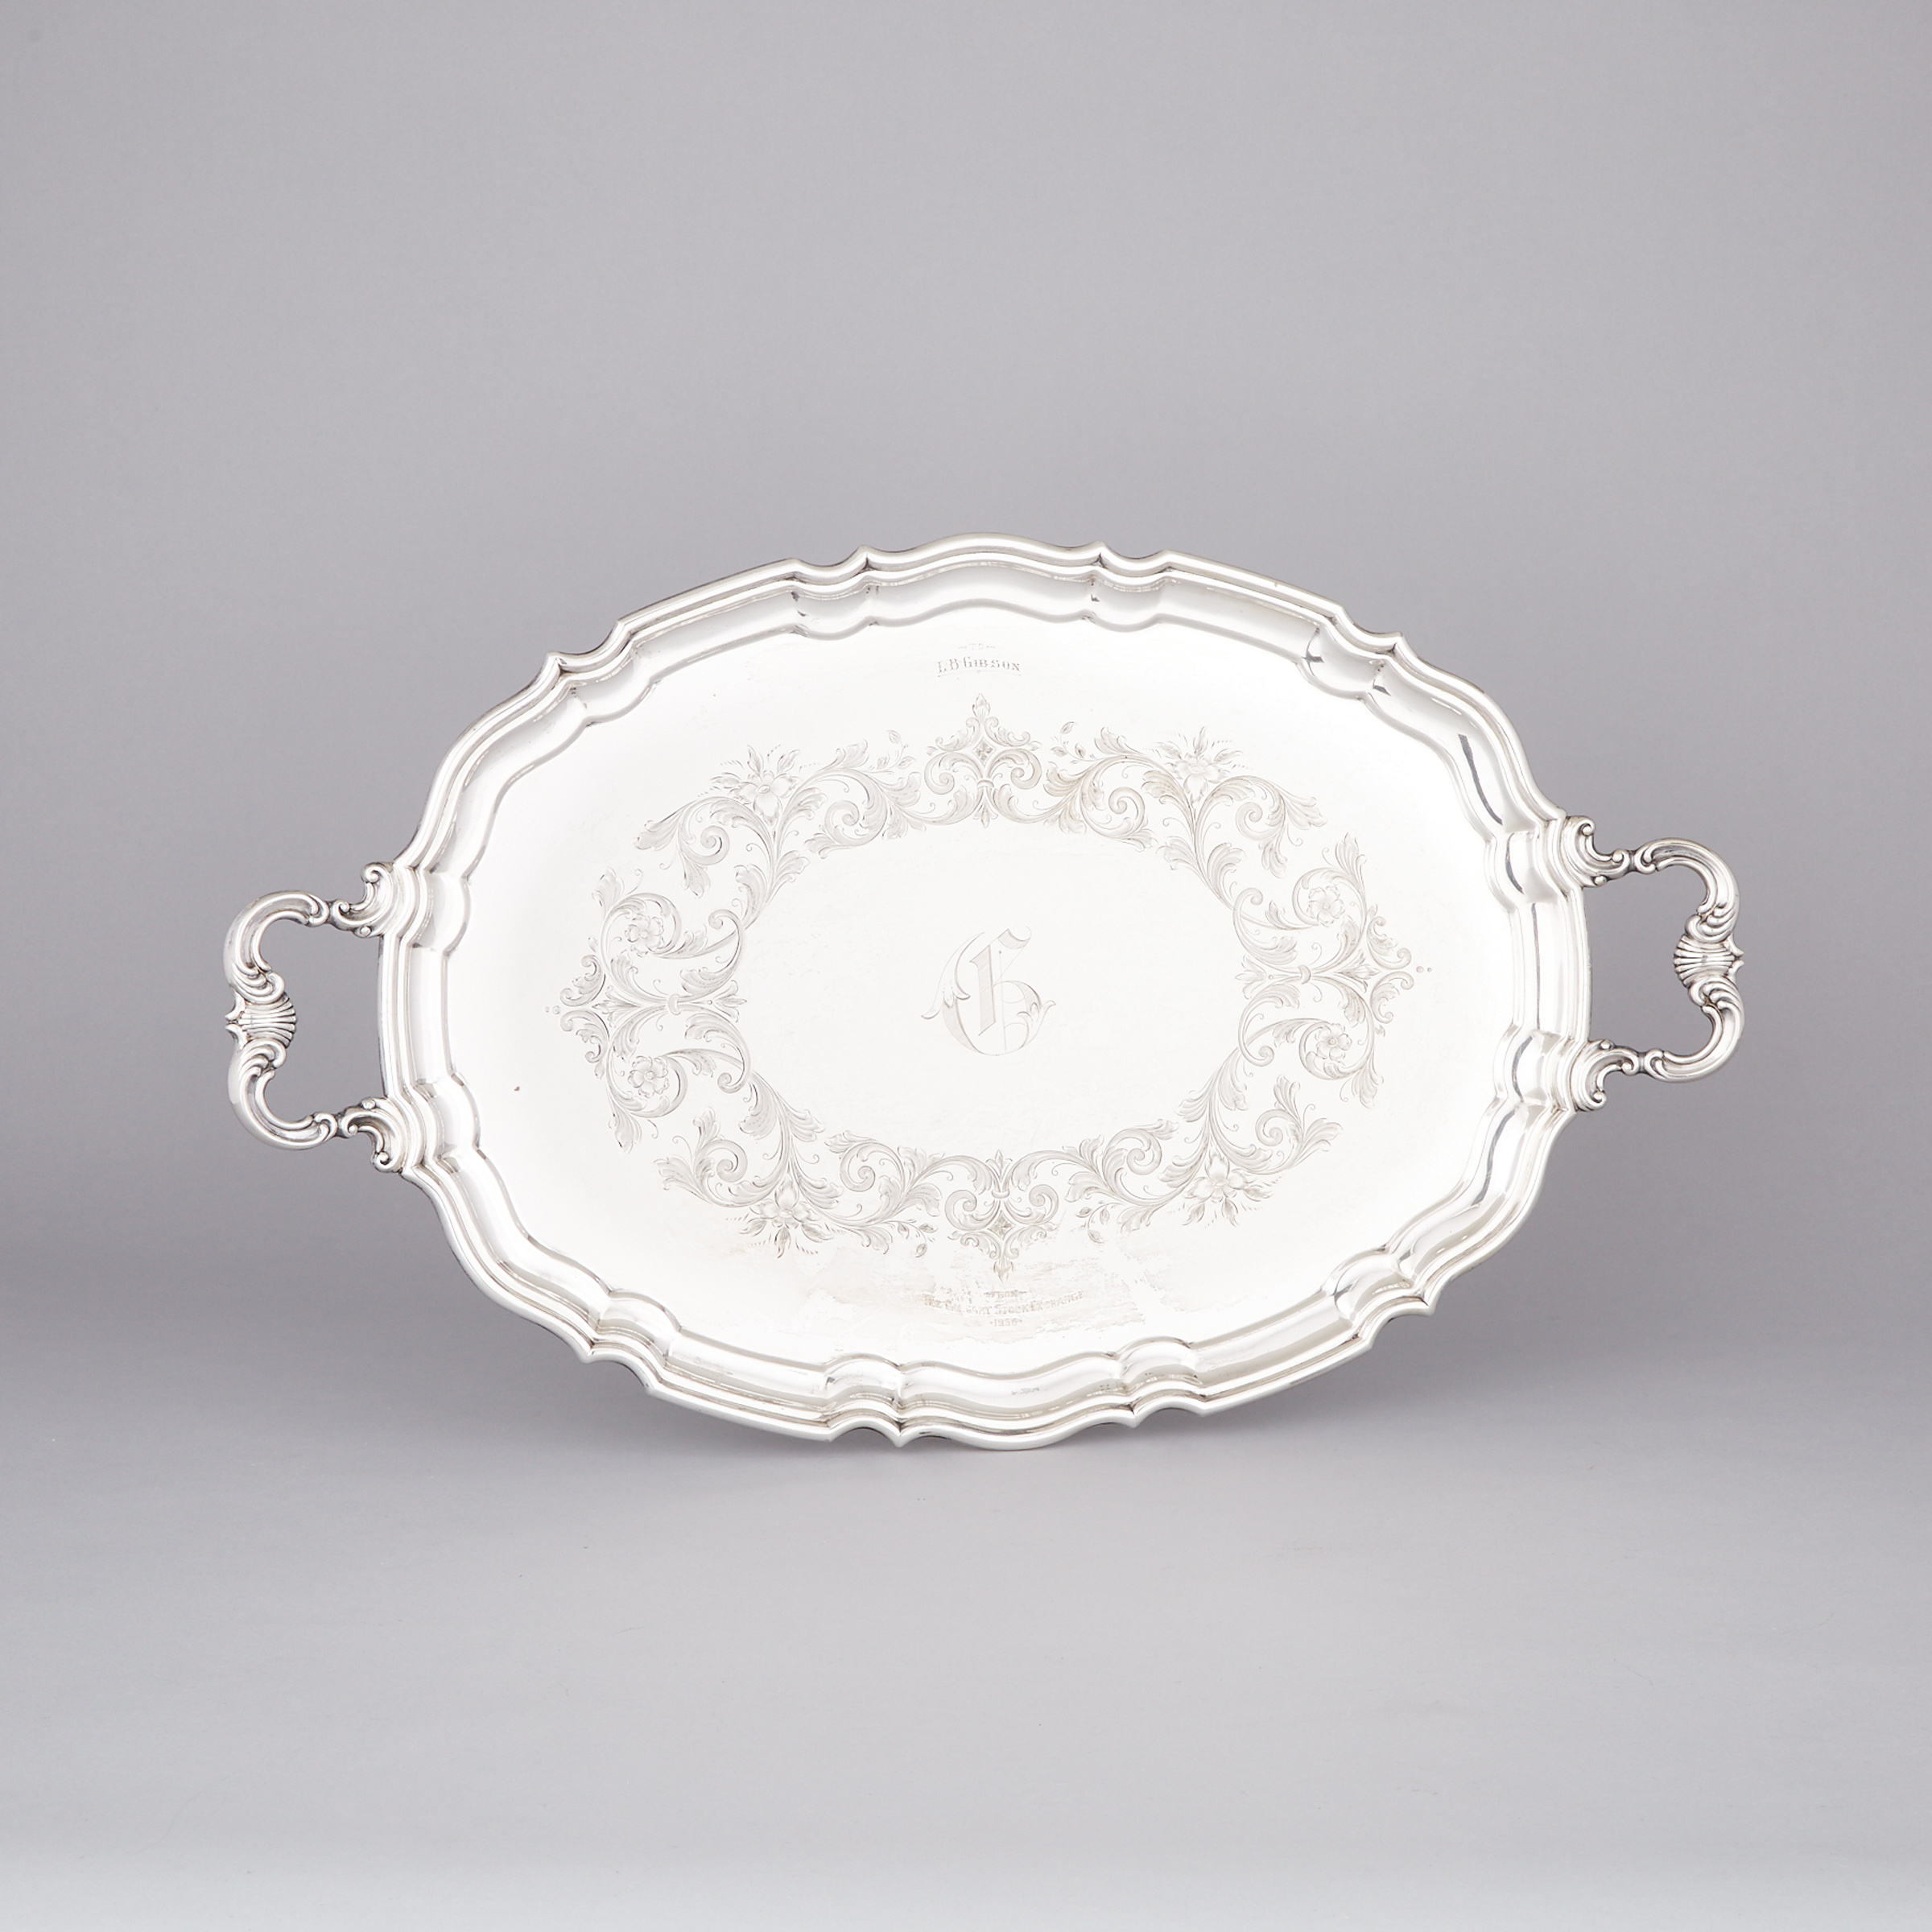 Canadian Silver Two-Handled Serving Tray, Henry Birks & Sons, Montreal, Que., 1955